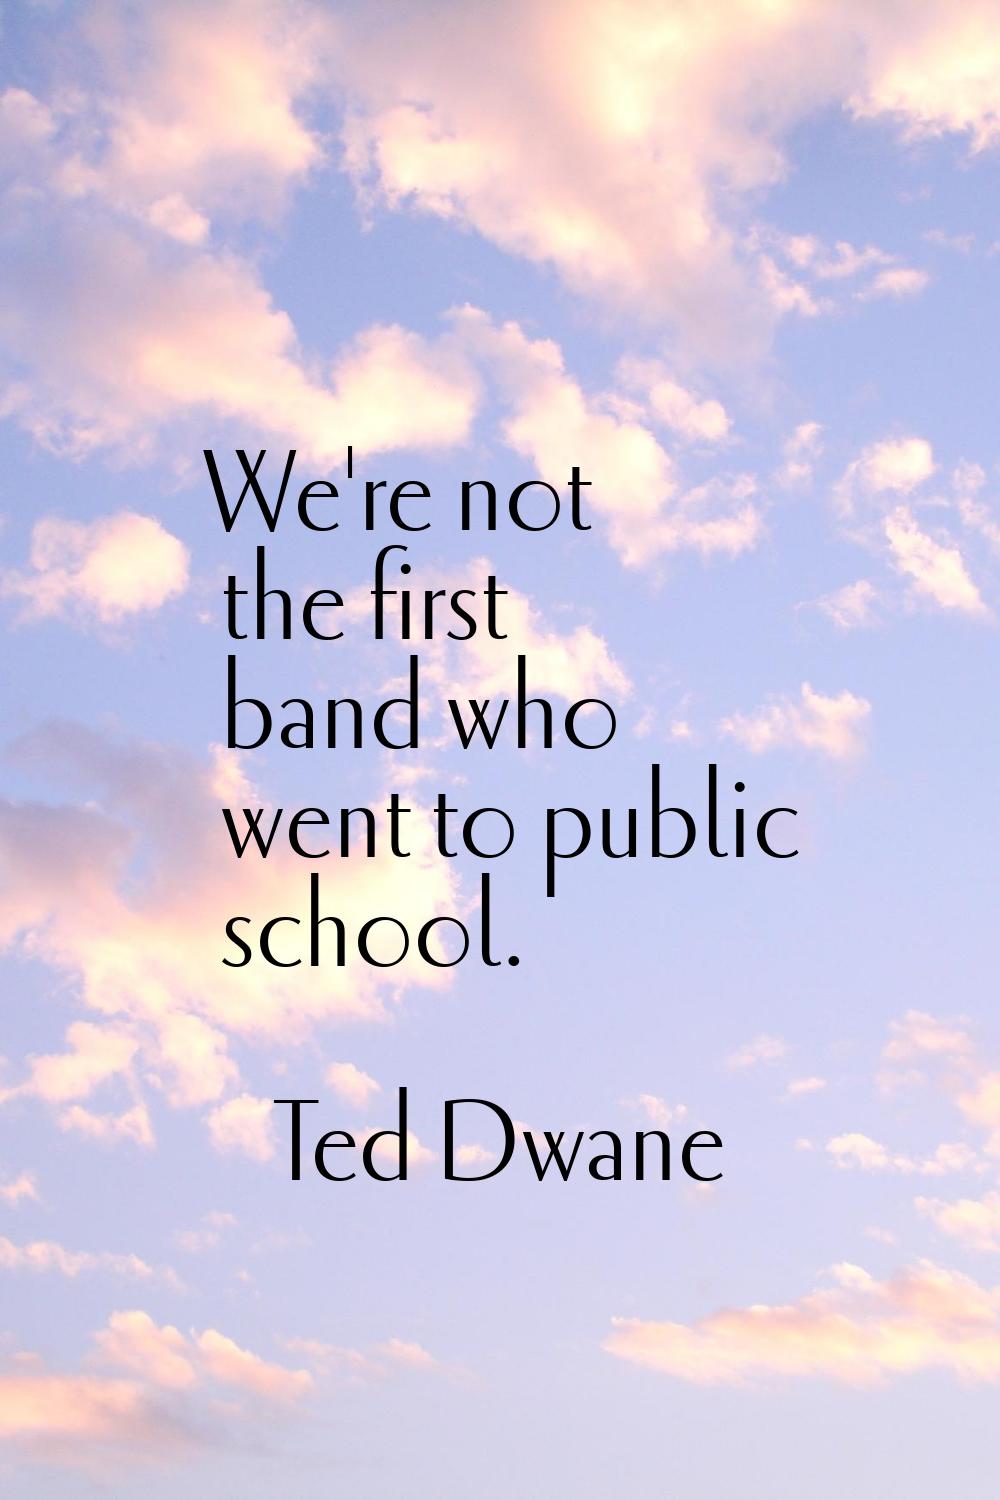 We're not the first band who went to public school.